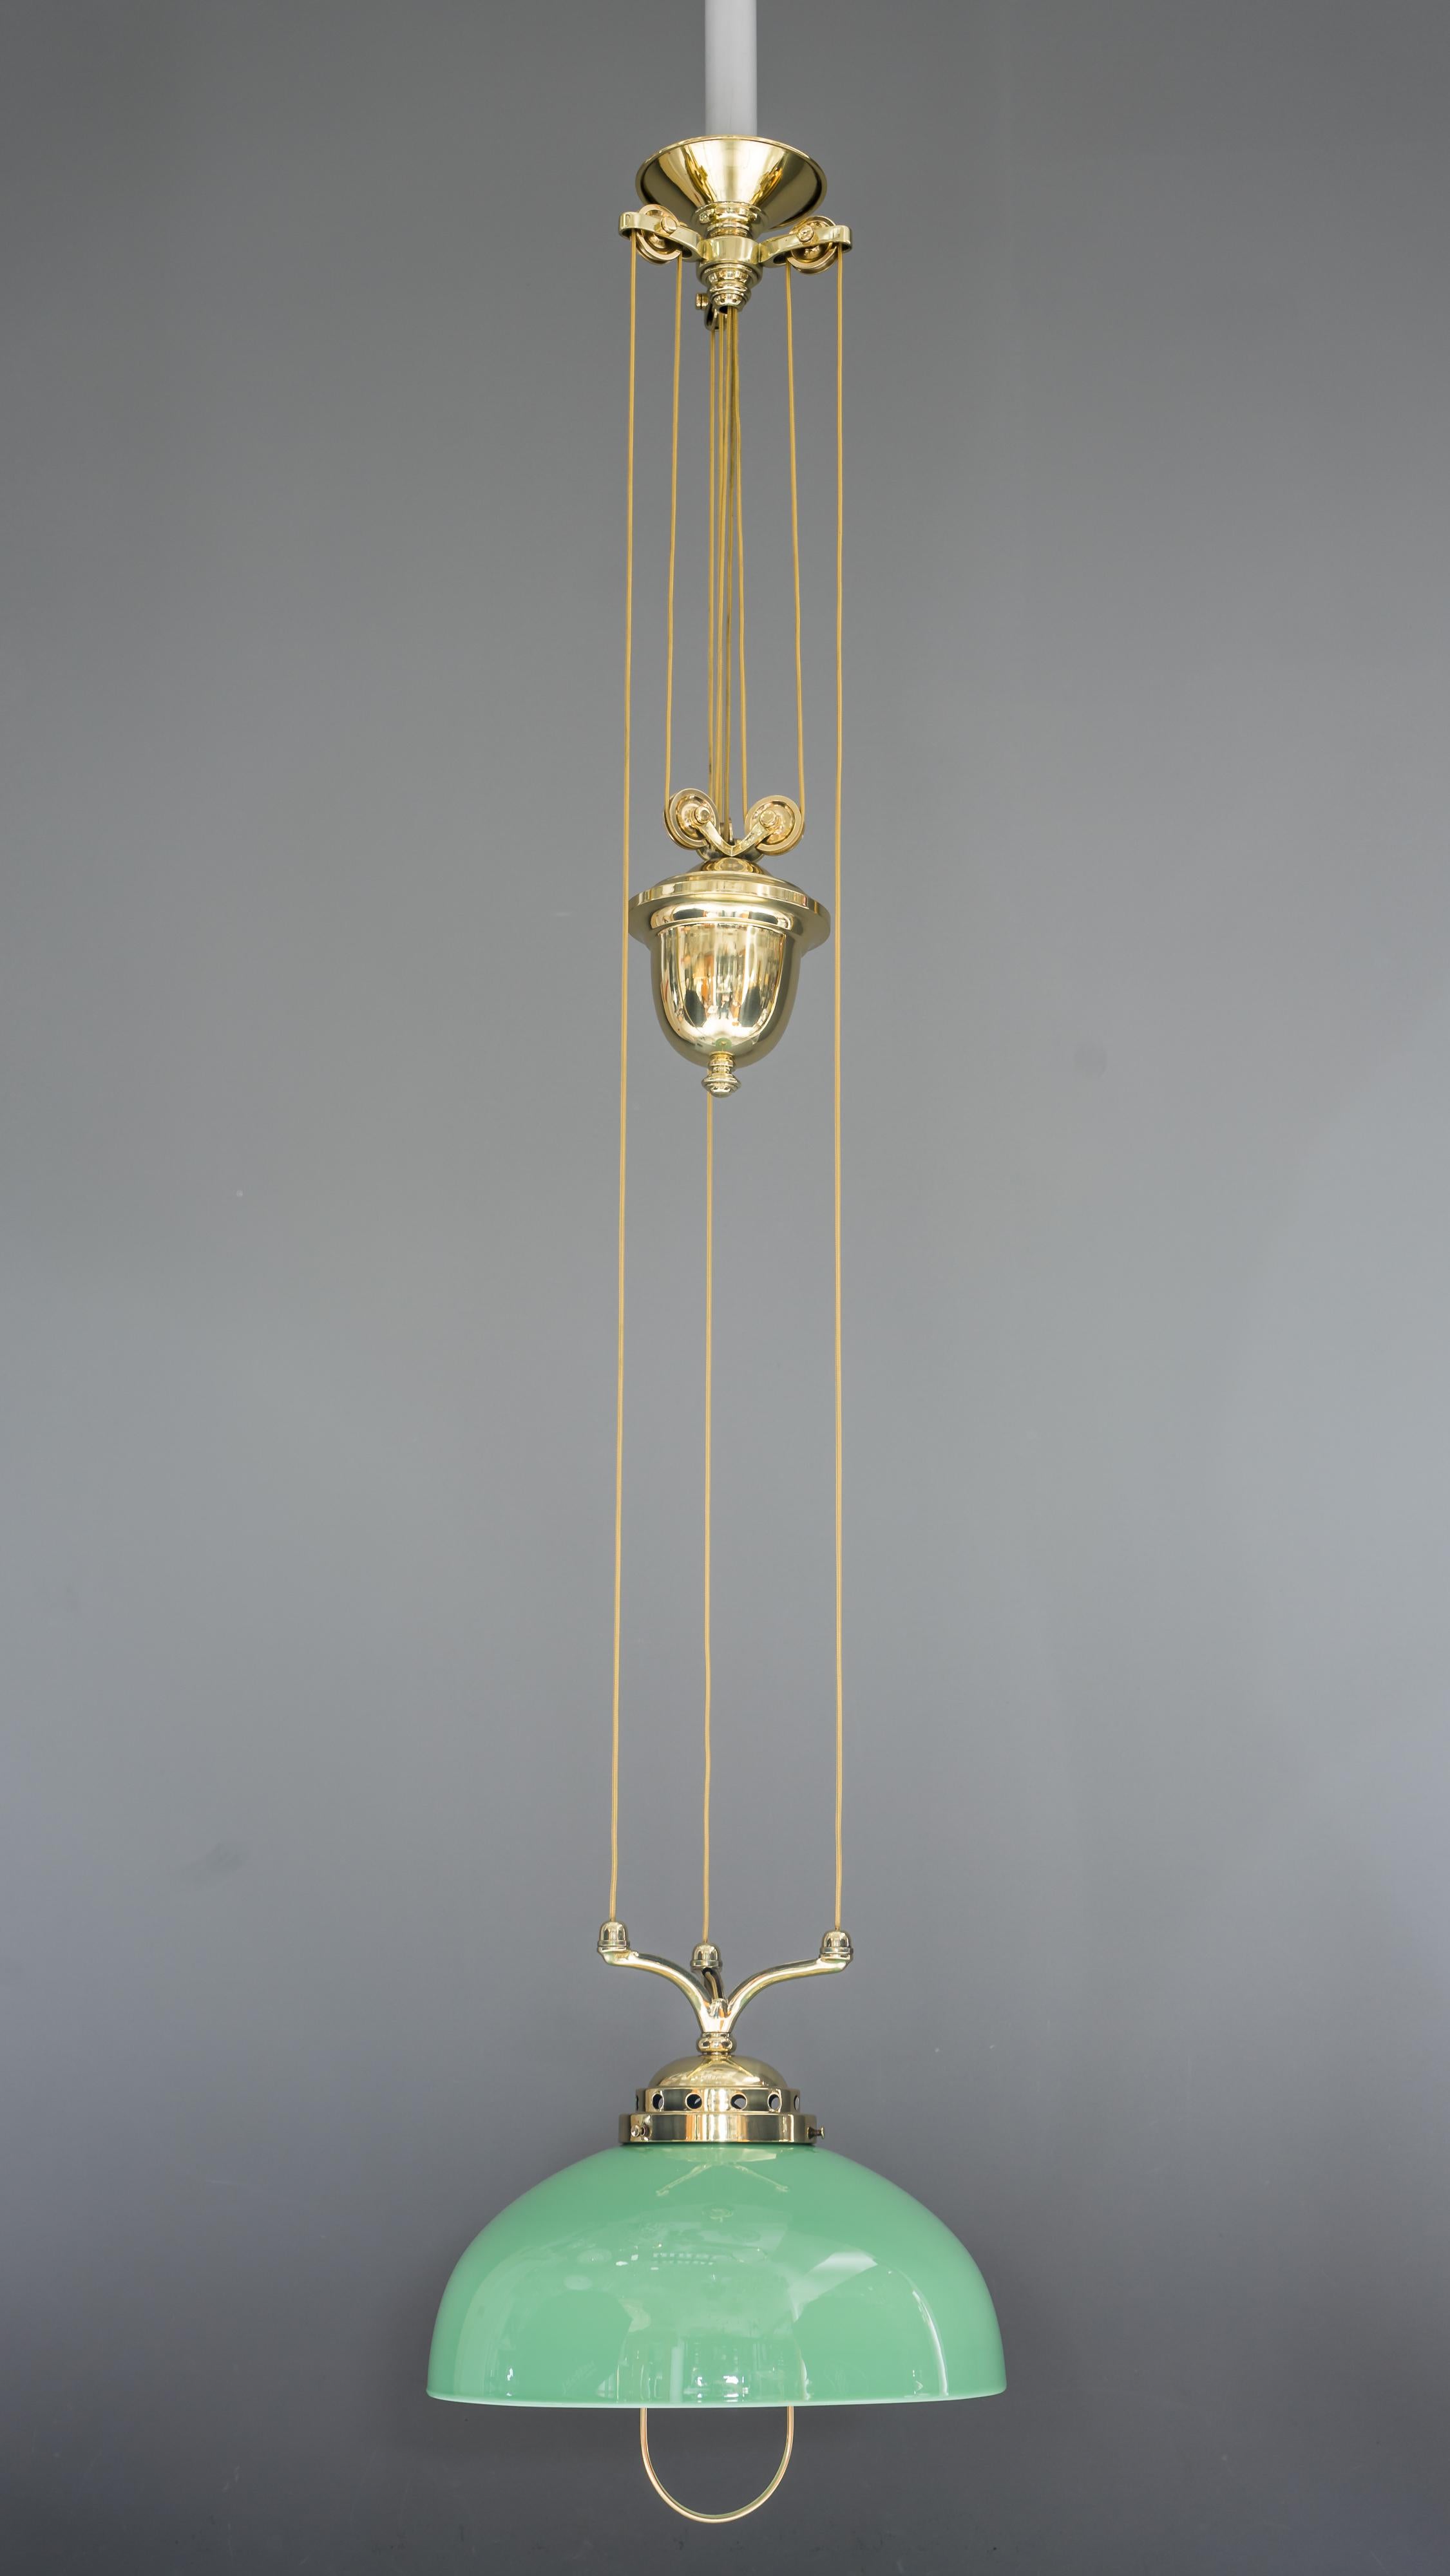 Adjustable jugendstil chandelier with green opal glass
Polished and stove enameled
Measures: The high is adjustable from 97cm-195cm
Wide is 31cm
New wiring.